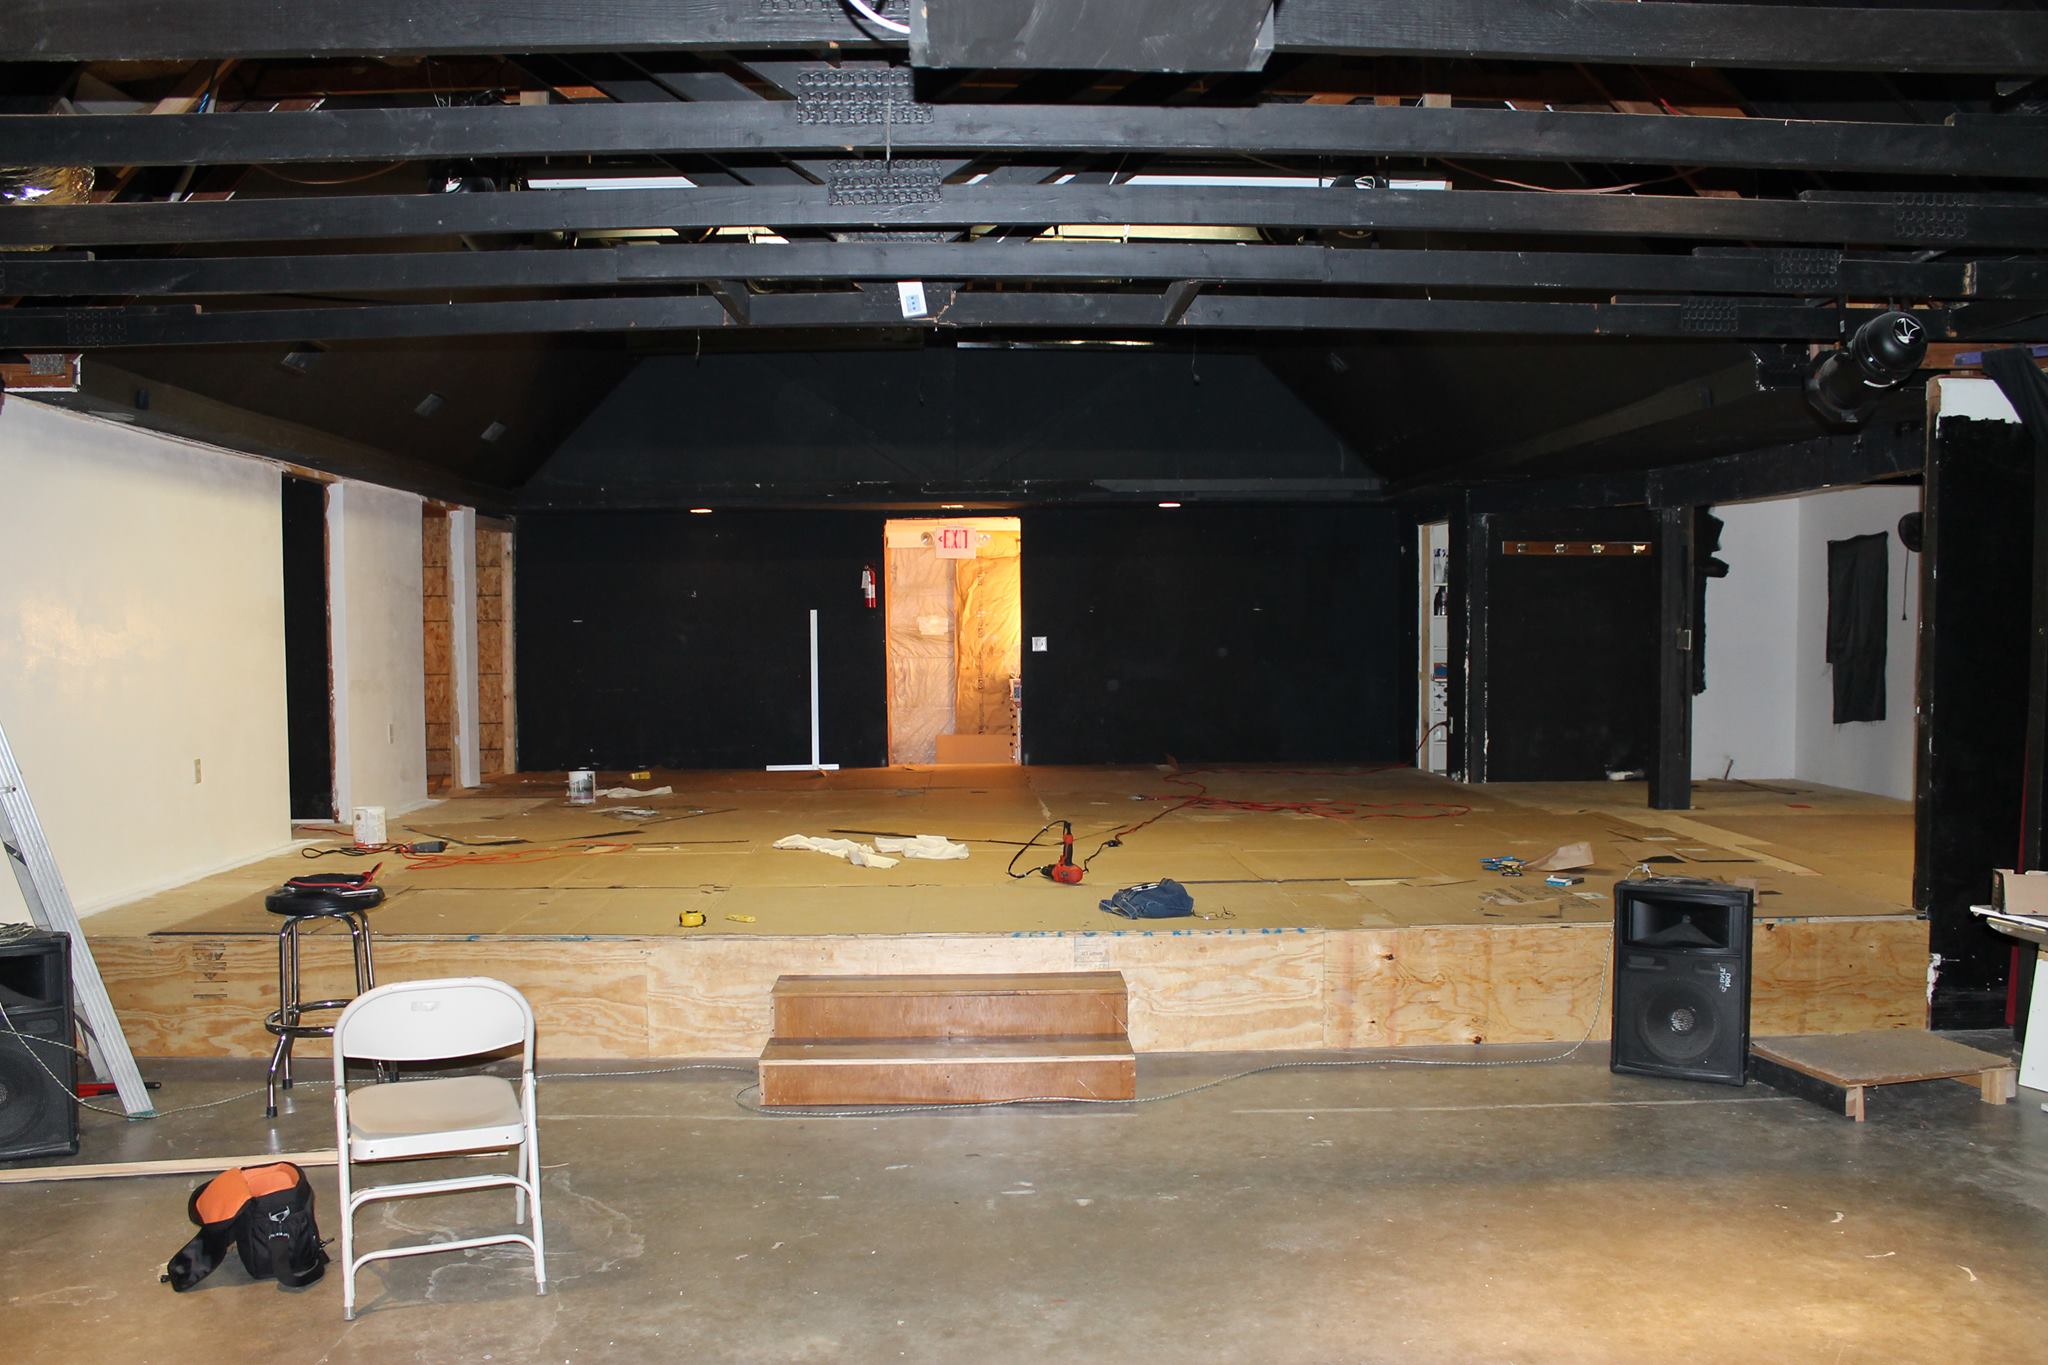 Our current stage takes shape in September 2013